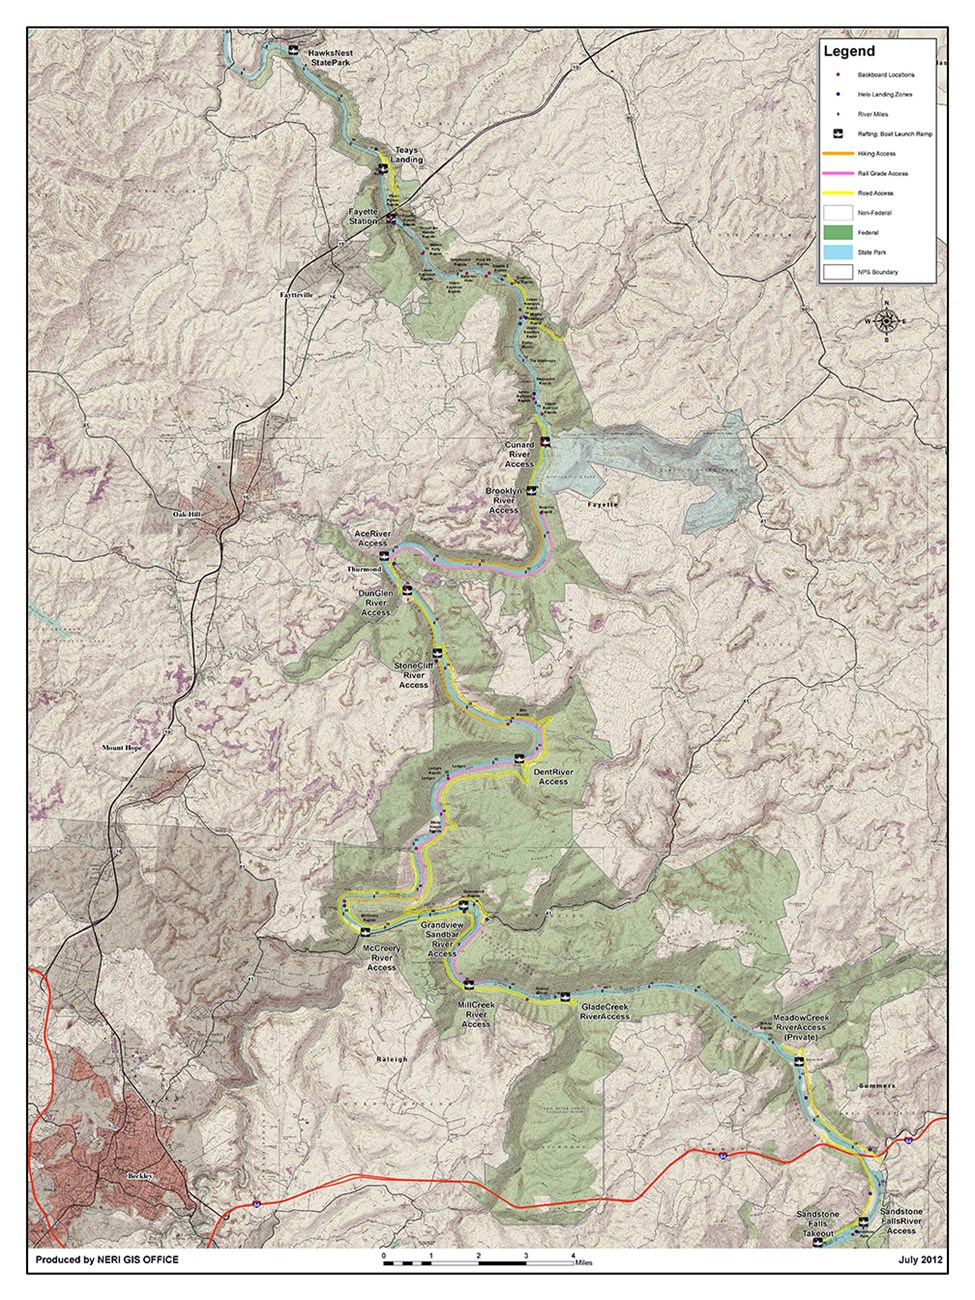 A detailed topographical map showing the entire New River Gorge National Park and Preserve, highlighting the New River and the access points along the river. North is to the top of the image